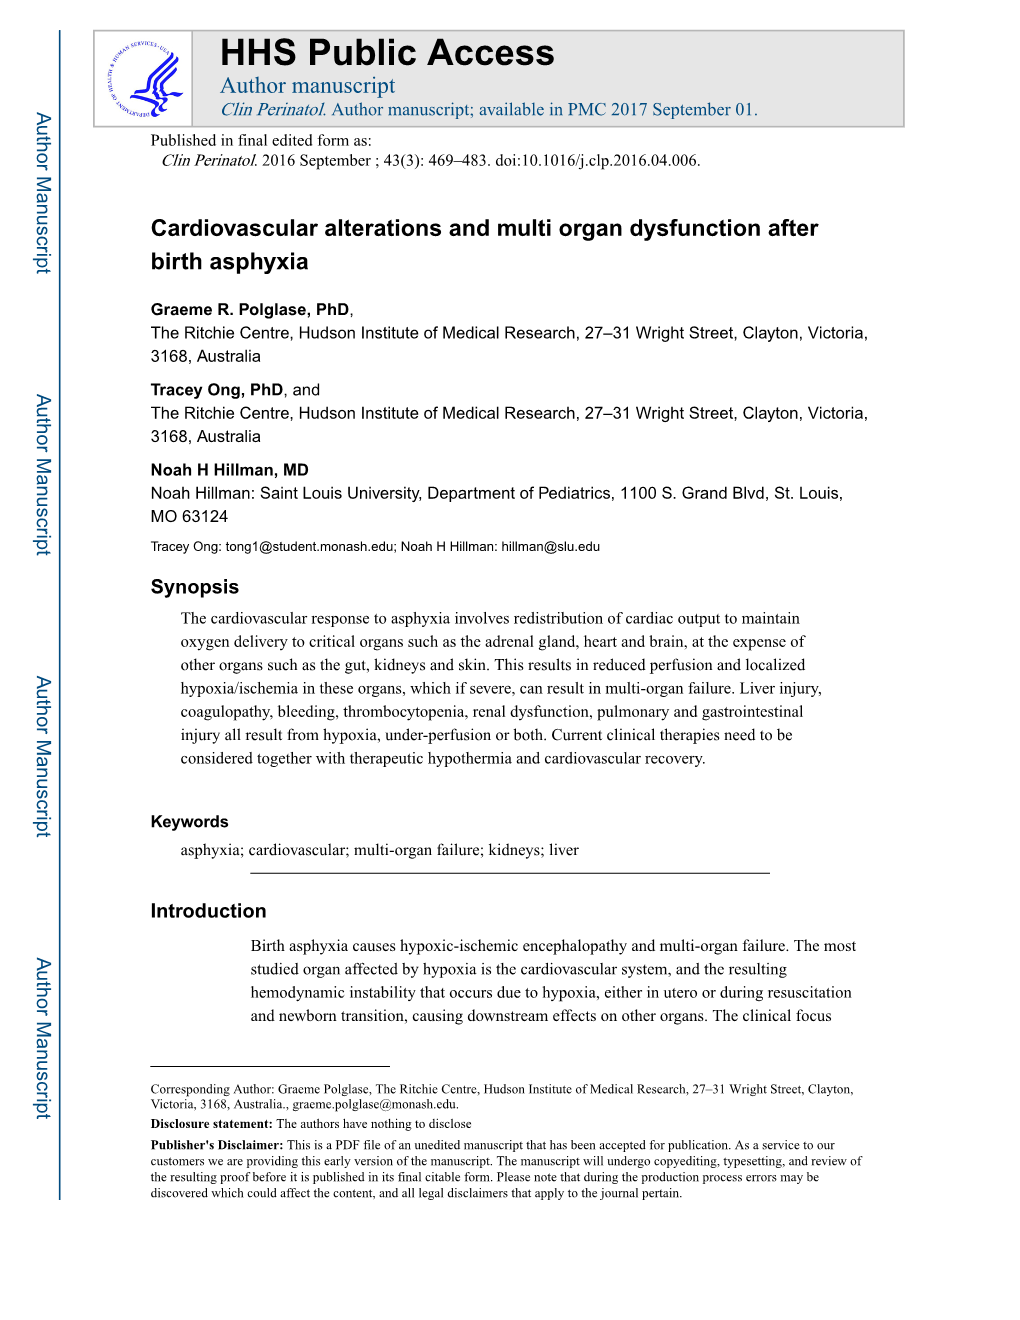 Cardiovascular Alterations and Multi Organ Dysfunction After Birth Asphyxia